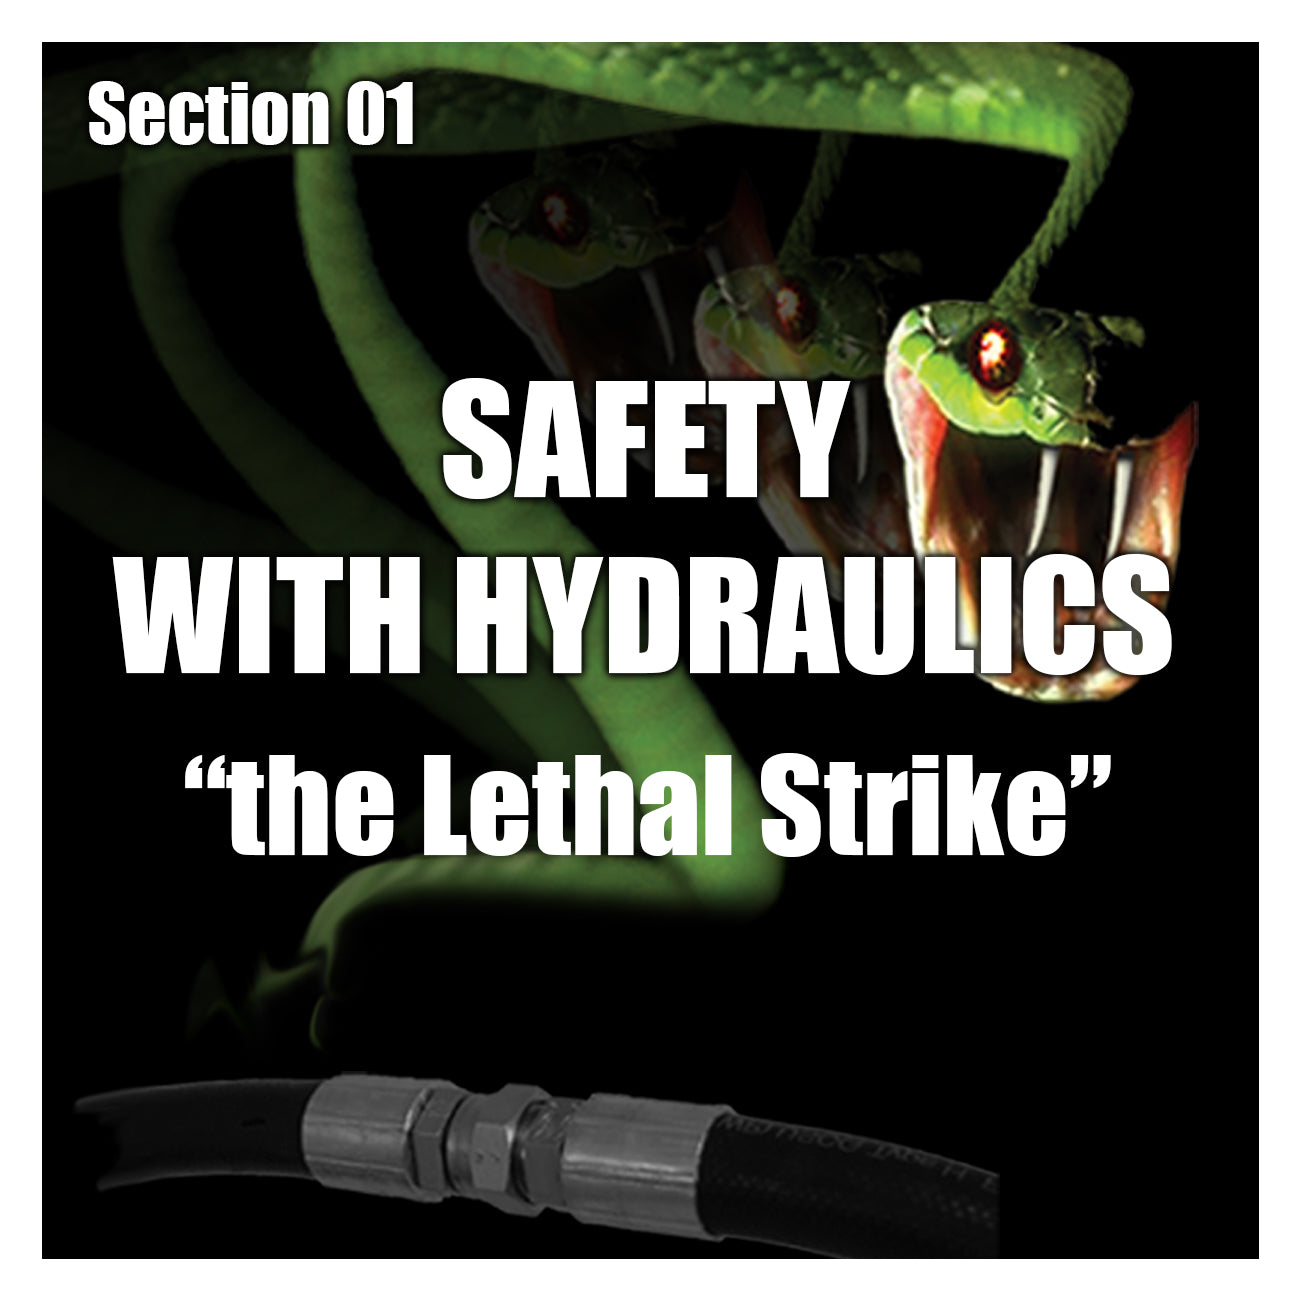 Safety with Hydraulics "the Lethal Strike"